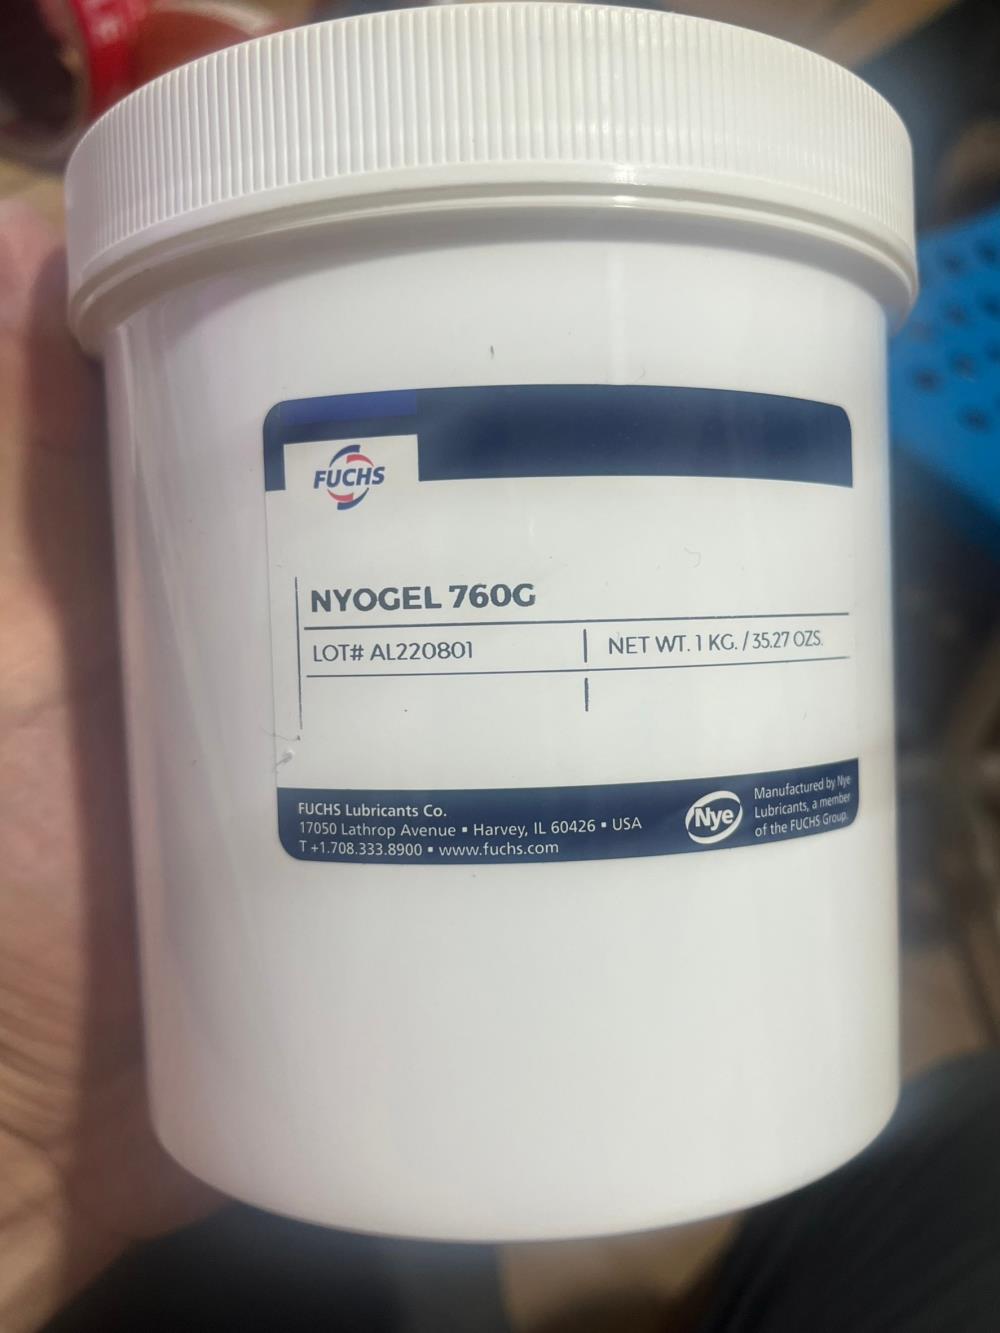 NyoGel 760G - The Leading Connector Grease ขนาด 1 kg......  มีของพร้อมส่ง จำนวนจำกัด,NYE NyoGel 760G,NYE,Hardware and Consumable/Industrial Oil and Lube